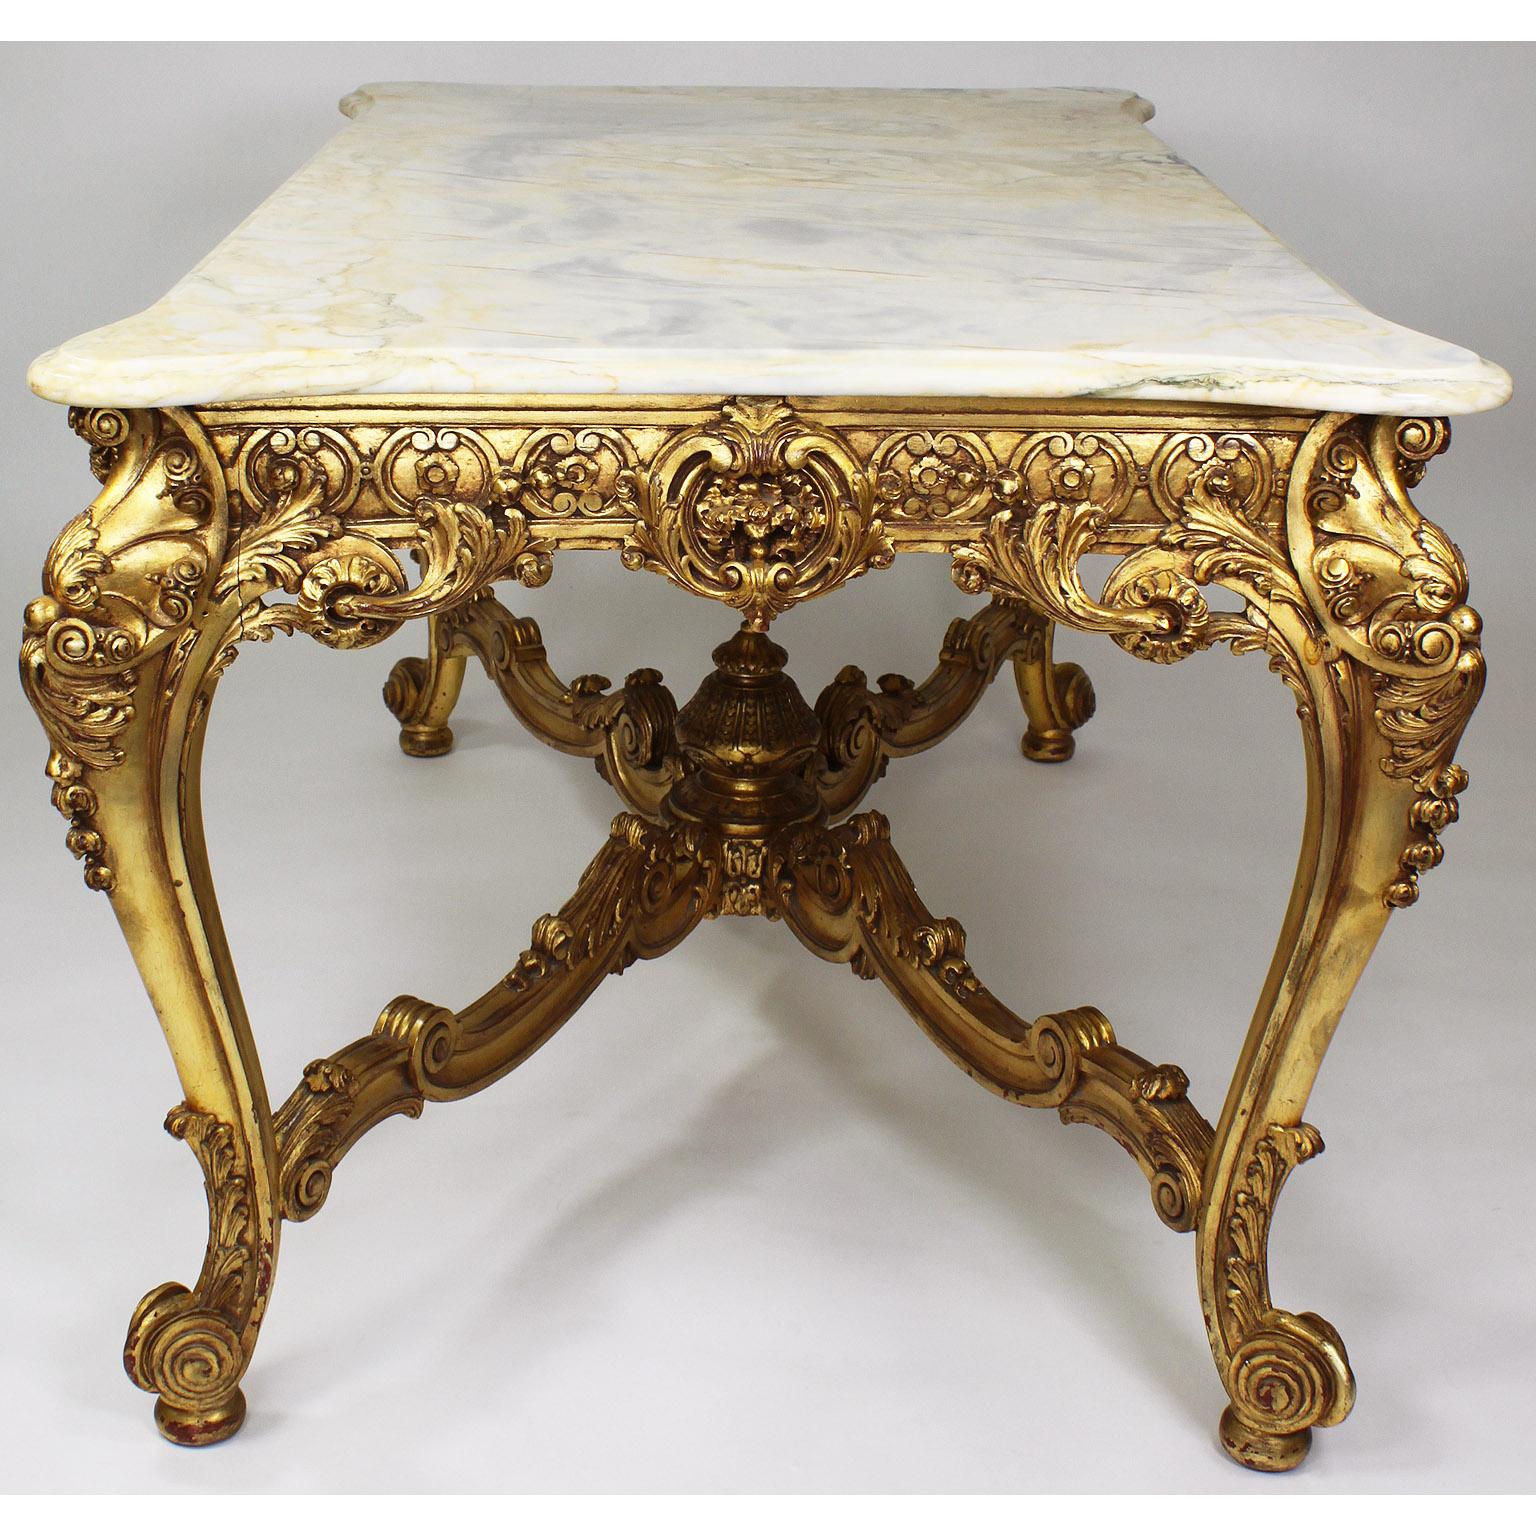 Fine French 19th-20th Century Louis XV Style Giltwood Carved Center Hall Table For Sale 2